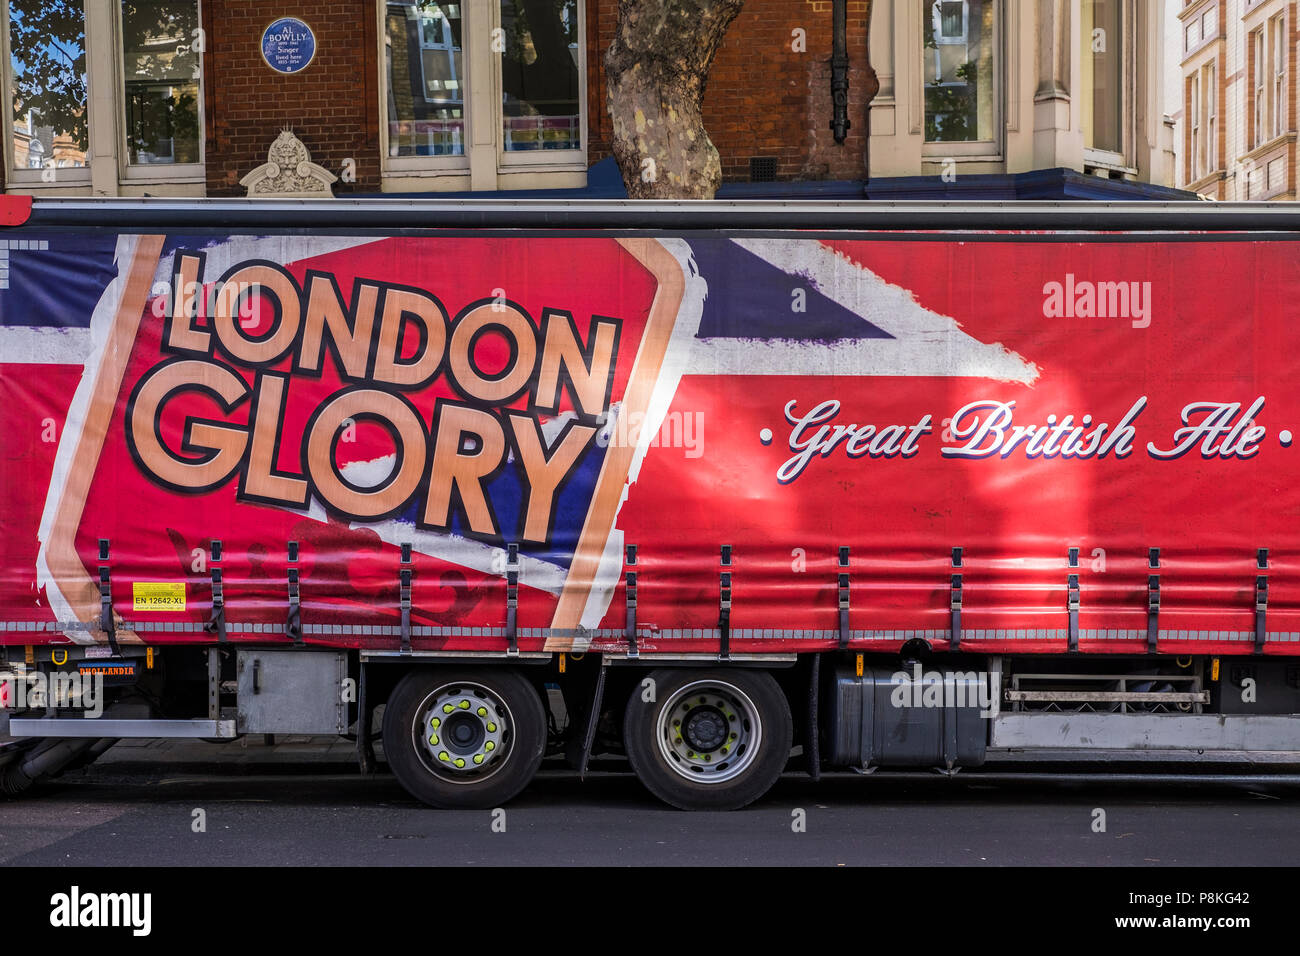 Greene King beer lorry making delivery, London, England, U.K. Stock Photo